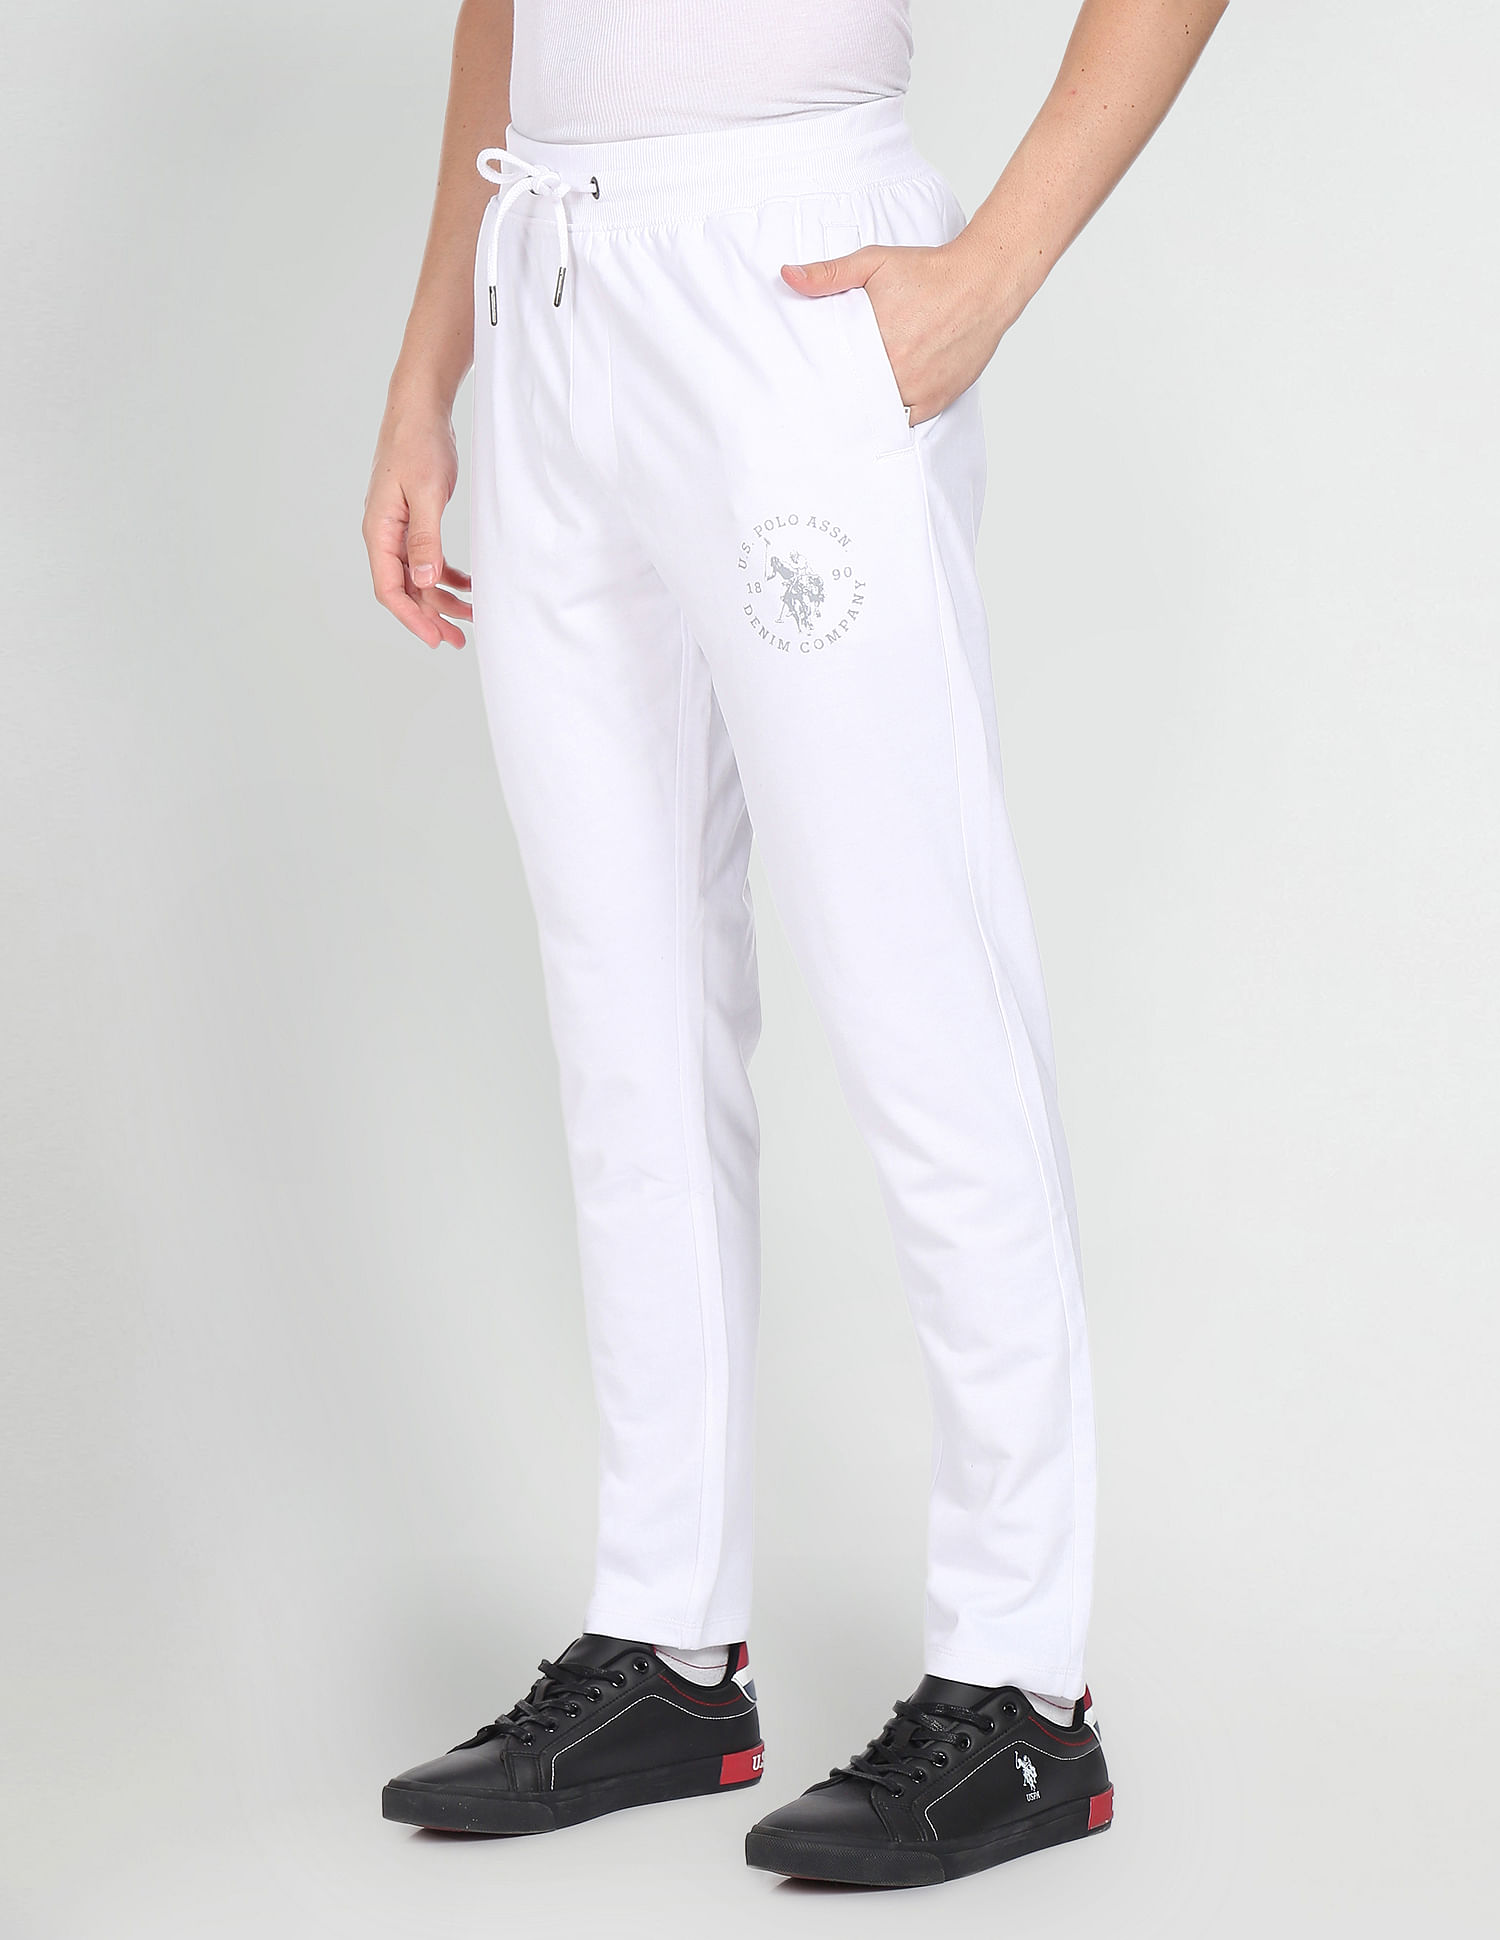 US POLO ASSN Printed Men White Track Pants  Buy US POLO ASSN Printed  Men White Track Pants Online at Best Prices in India  Flipkartcom